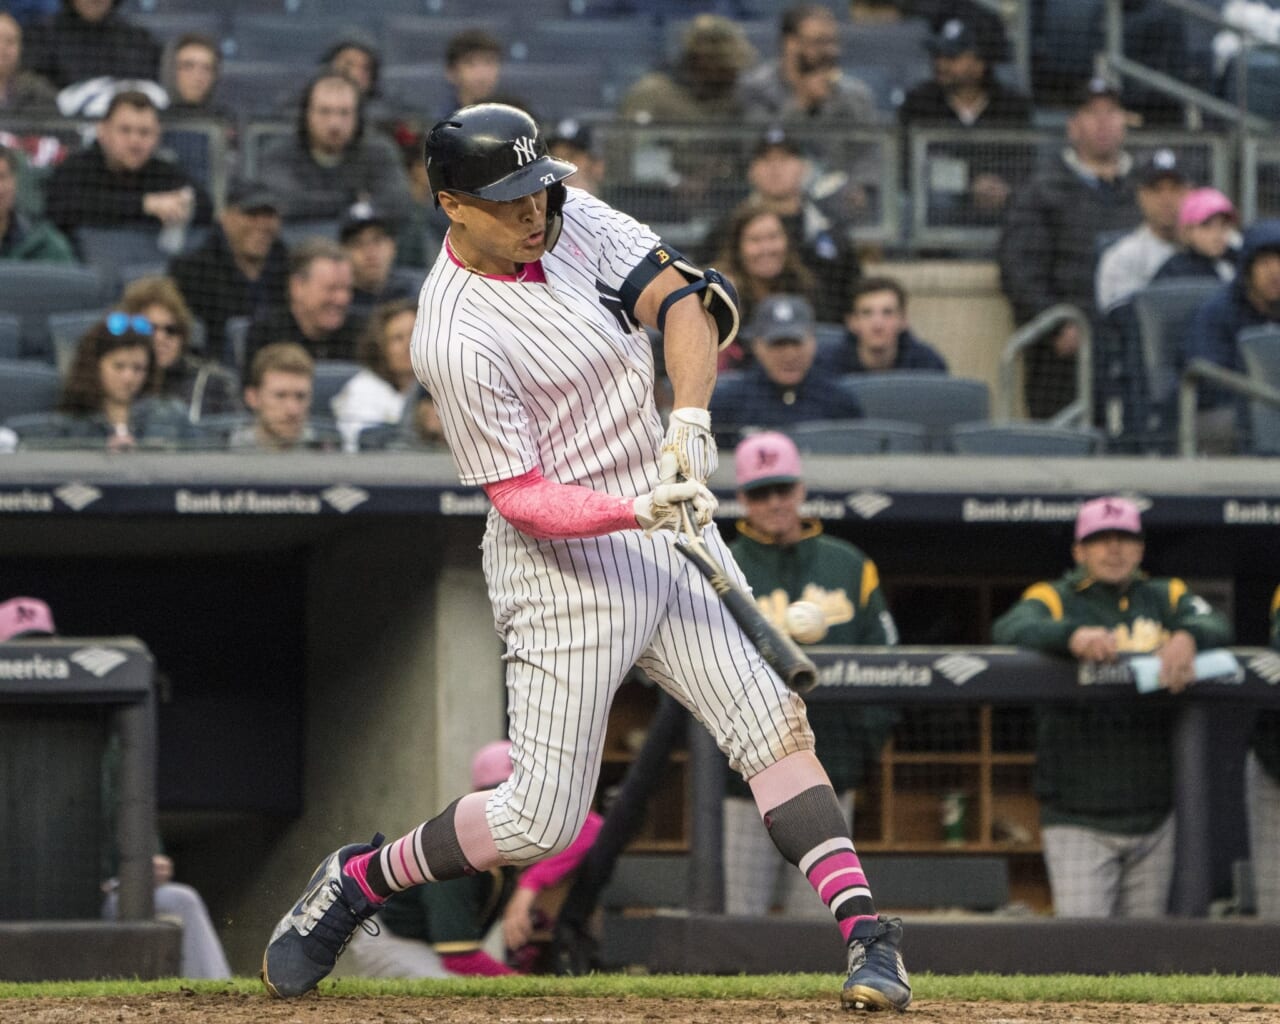 New York Yankees Player Profiles: Giancarlo Stanton; can he power the Yankees to a 28th World Championship? (video)